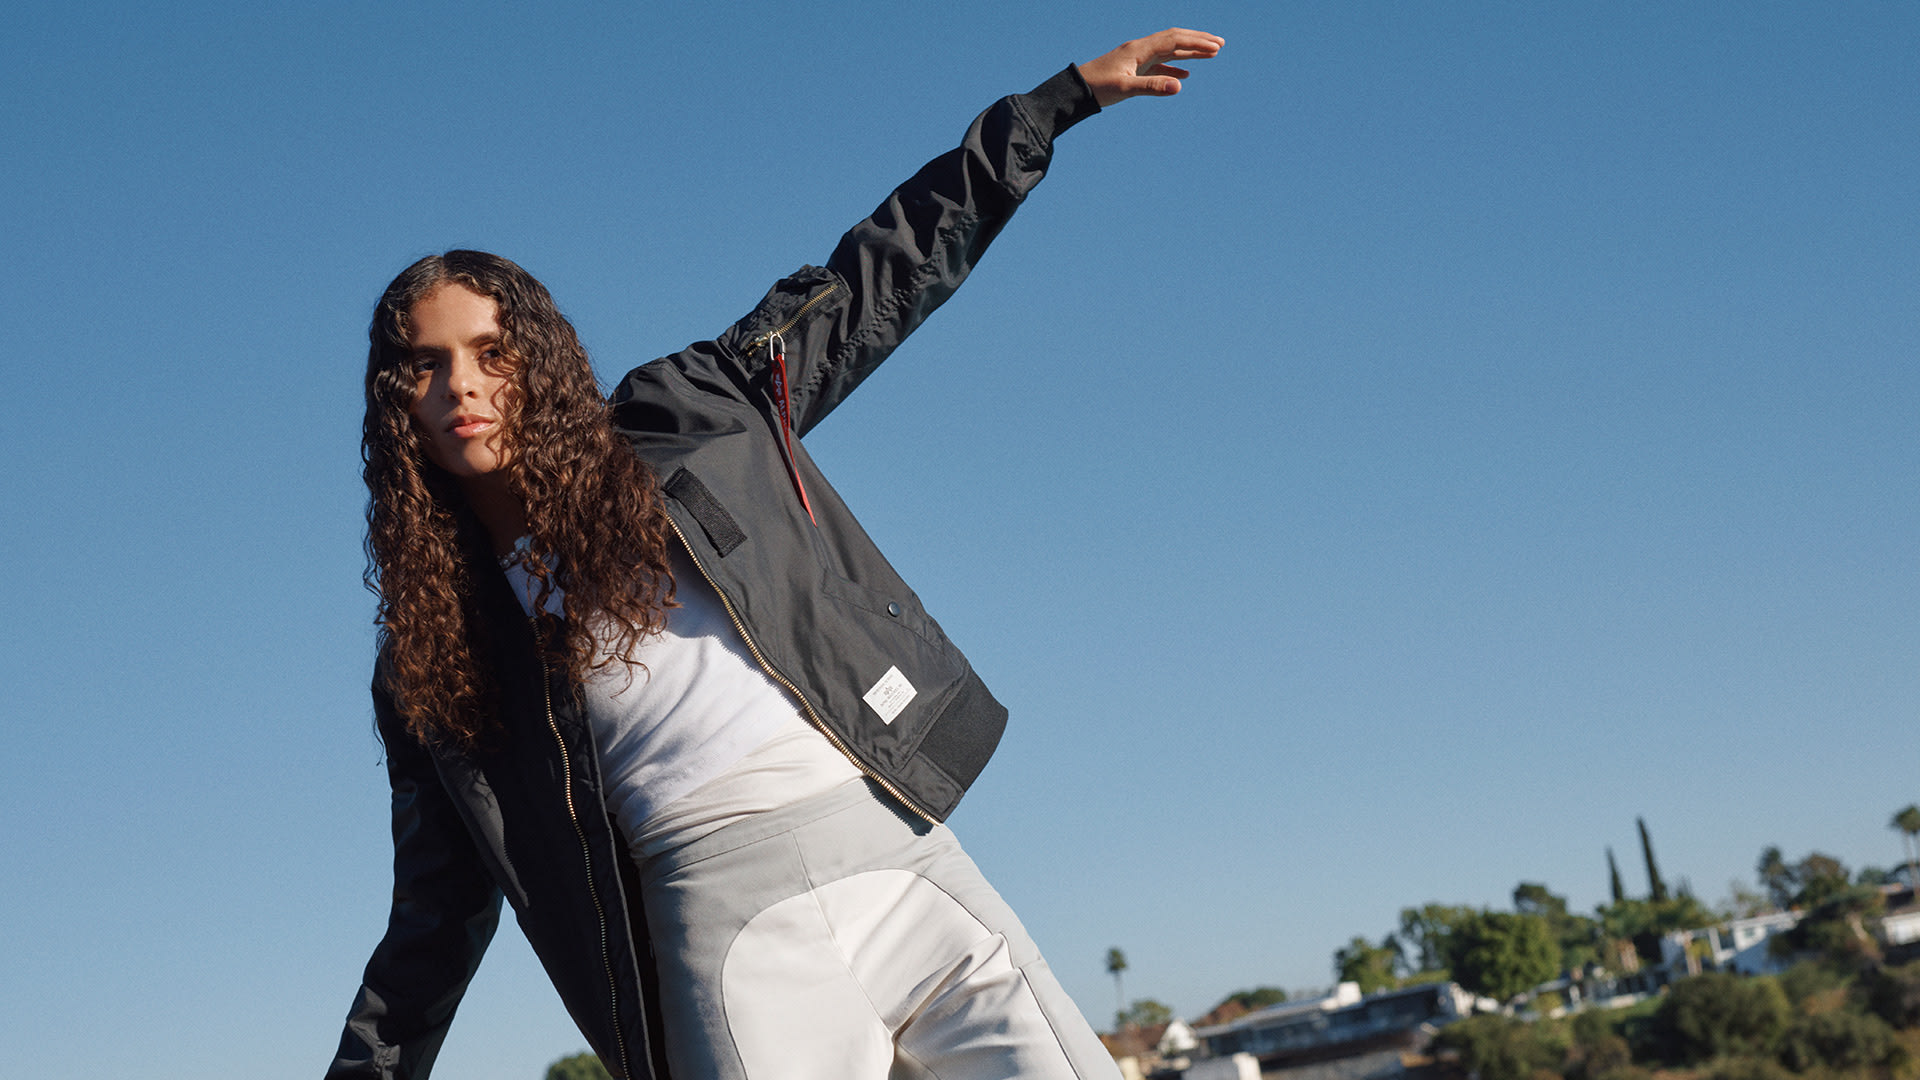 070 Shake and the 070 crew for Alpha Industries&#x27; SS22 campaign